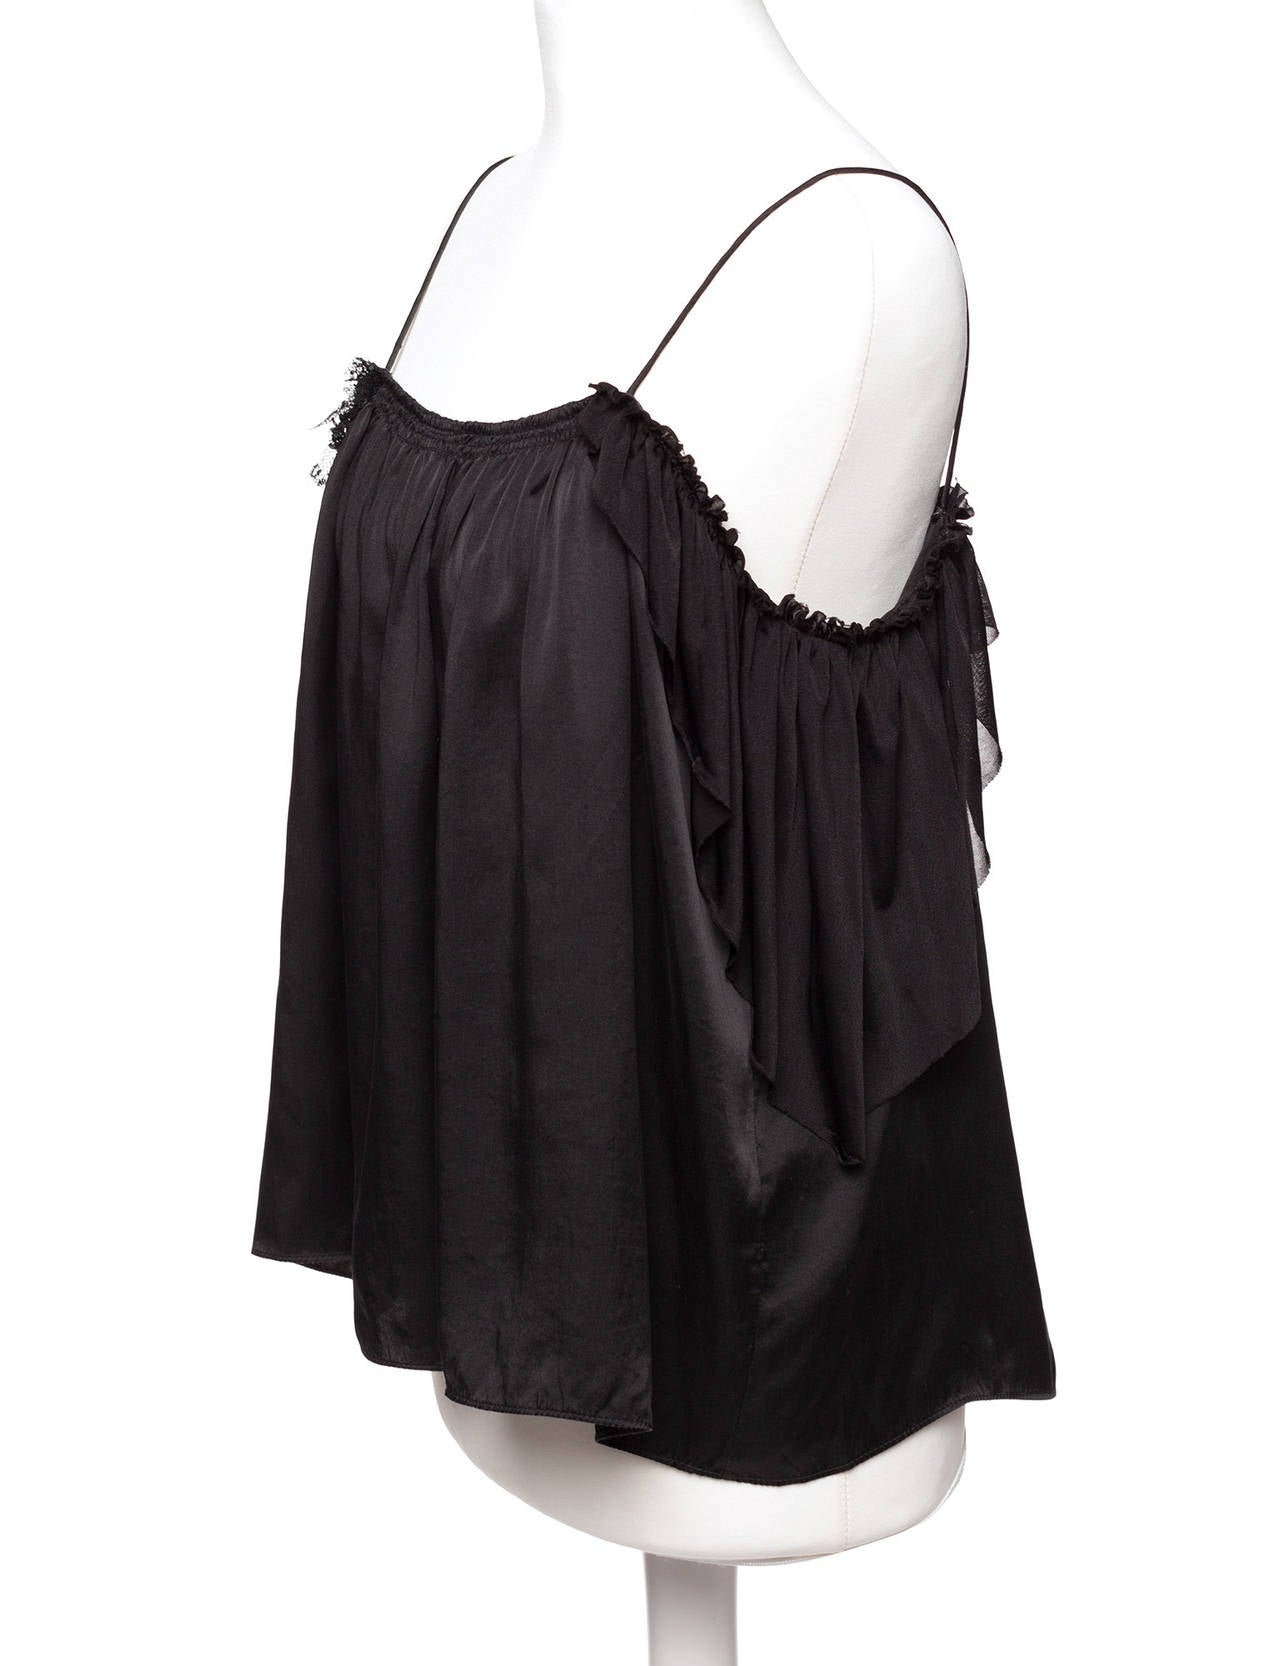 Balenciaga le Dix black silk camisole with lace flaps. Camisole in black silk with deconstructed underarm insets of lace and shredded silk, spaghetti straps, length of camisole is just to waist.